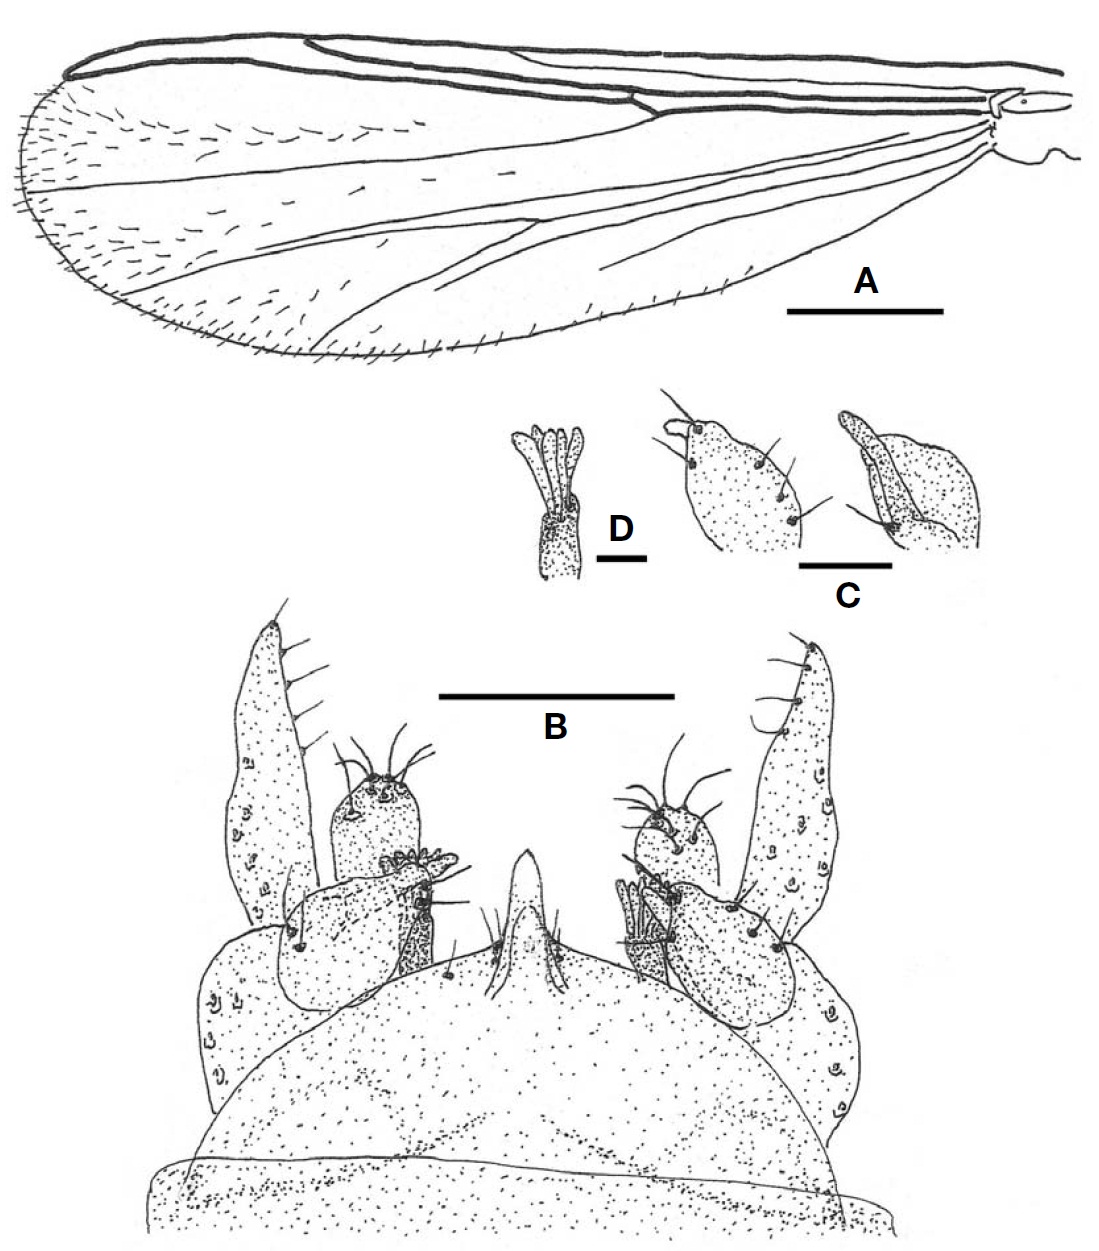 Tanytarsus uresiacutus (male). A Wing; B Hypopygium; C Superior volsella (dorsal and ventral from left); D Medianvolsella. Scale bars: A=0.5 mm B=0.05 mm C=0.02 mm D=0.01 mm.